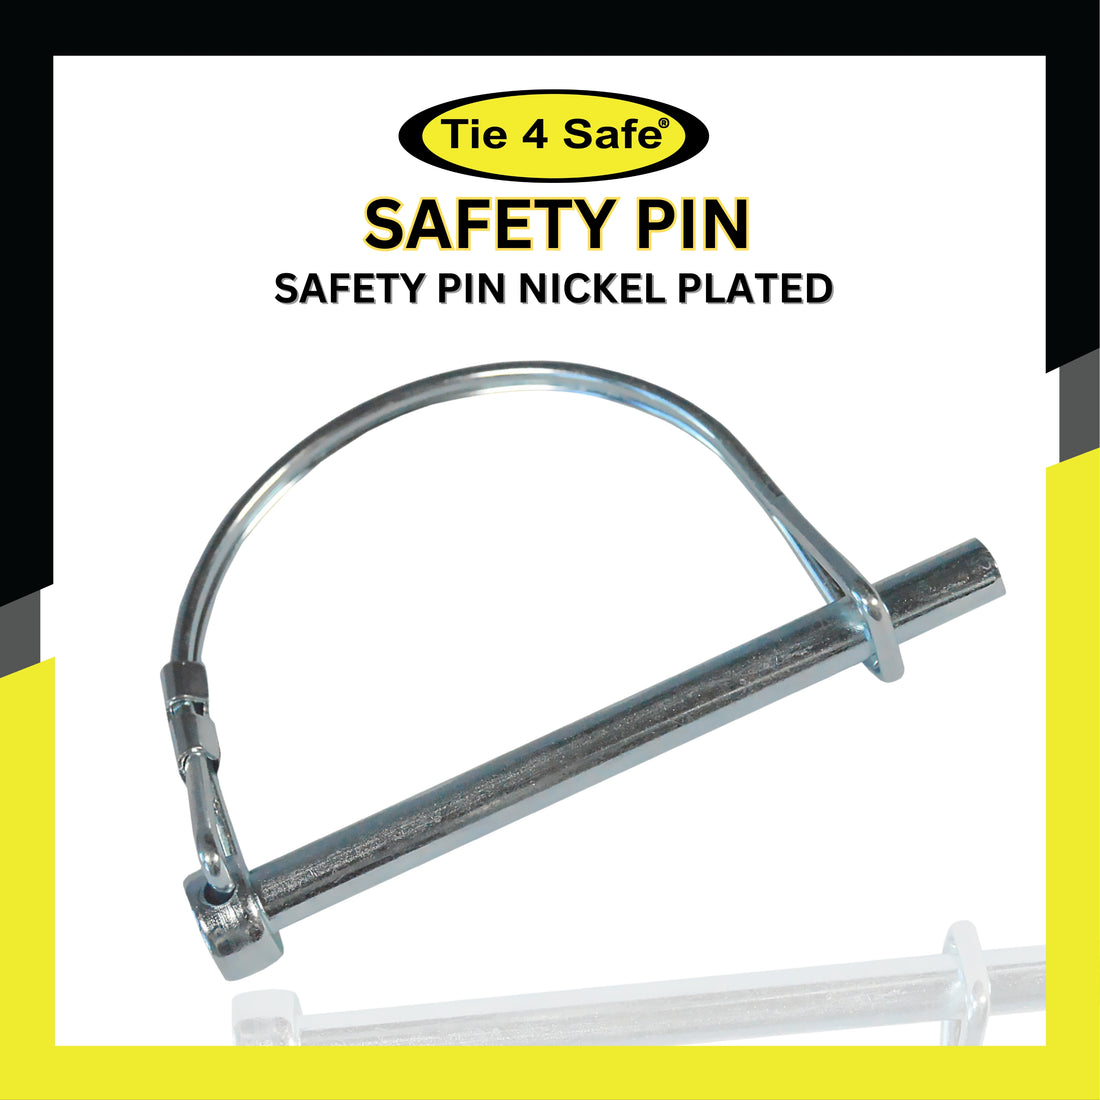 1/4"x 3" Safety Pin Nickel Plated